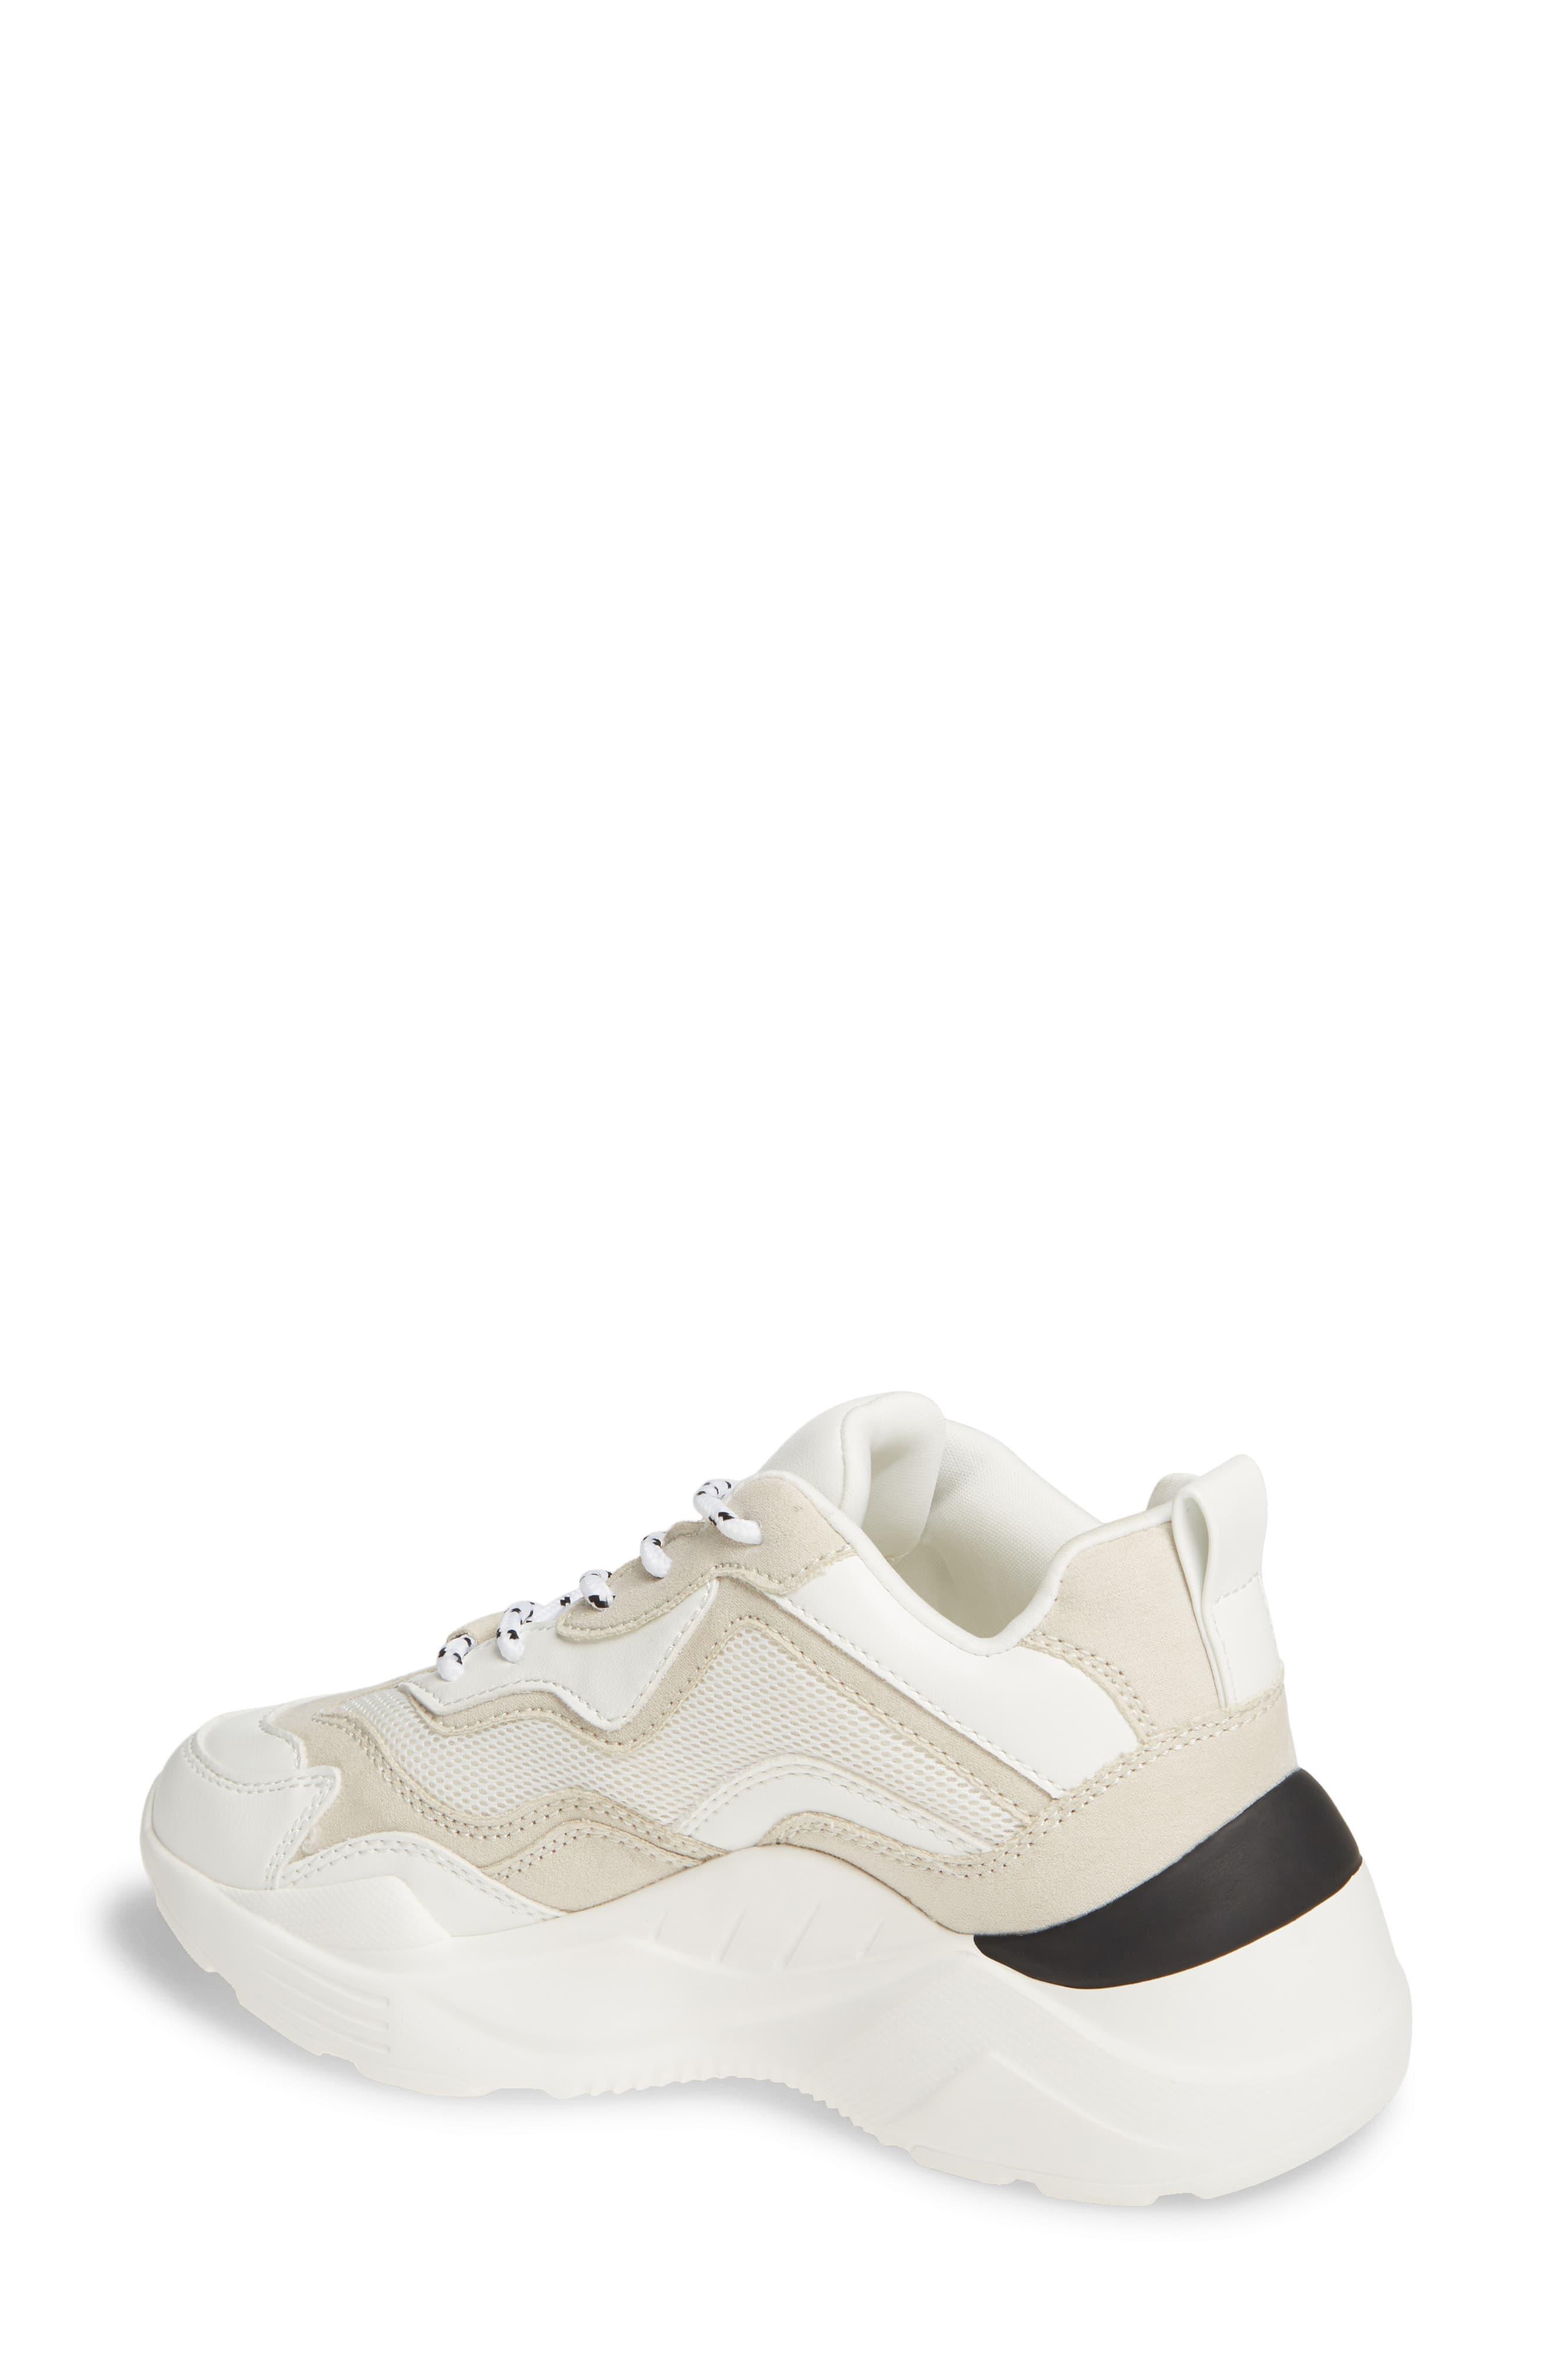 TOPSHOP Cancun Chunky Sneakers in White | Lyst